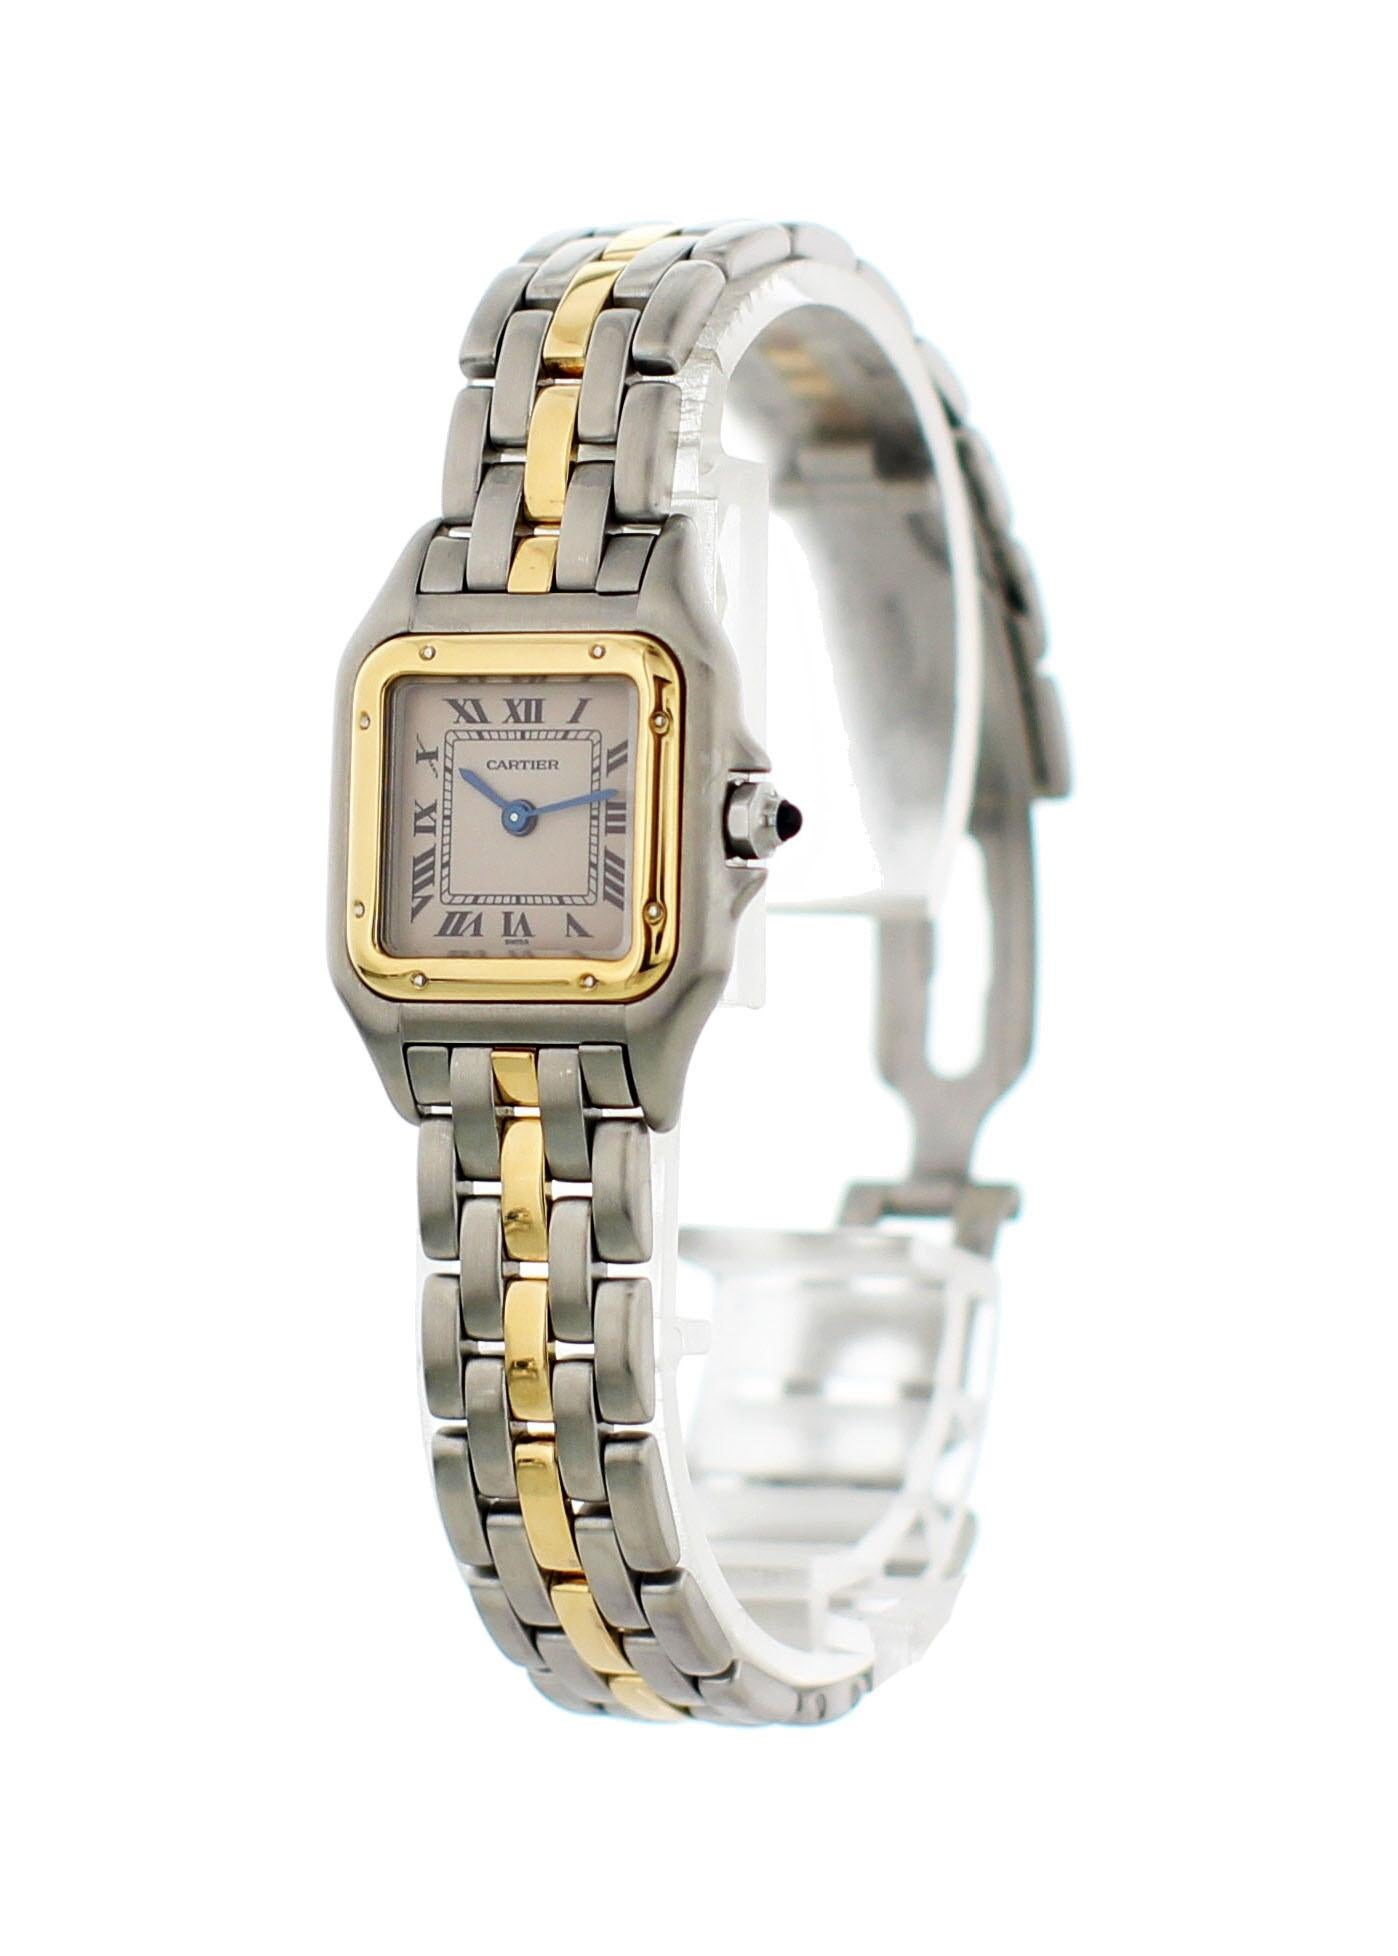 Cartier Panthere Two Tone 18K Yellow Gold & Stainless Steel 1120. 23 mm stainless steel case. 18K yellow gold bezel. Off-white dial with blue hands and black Roman numerals. 18K yellow gold and stainless steel band with stainless steel hidden